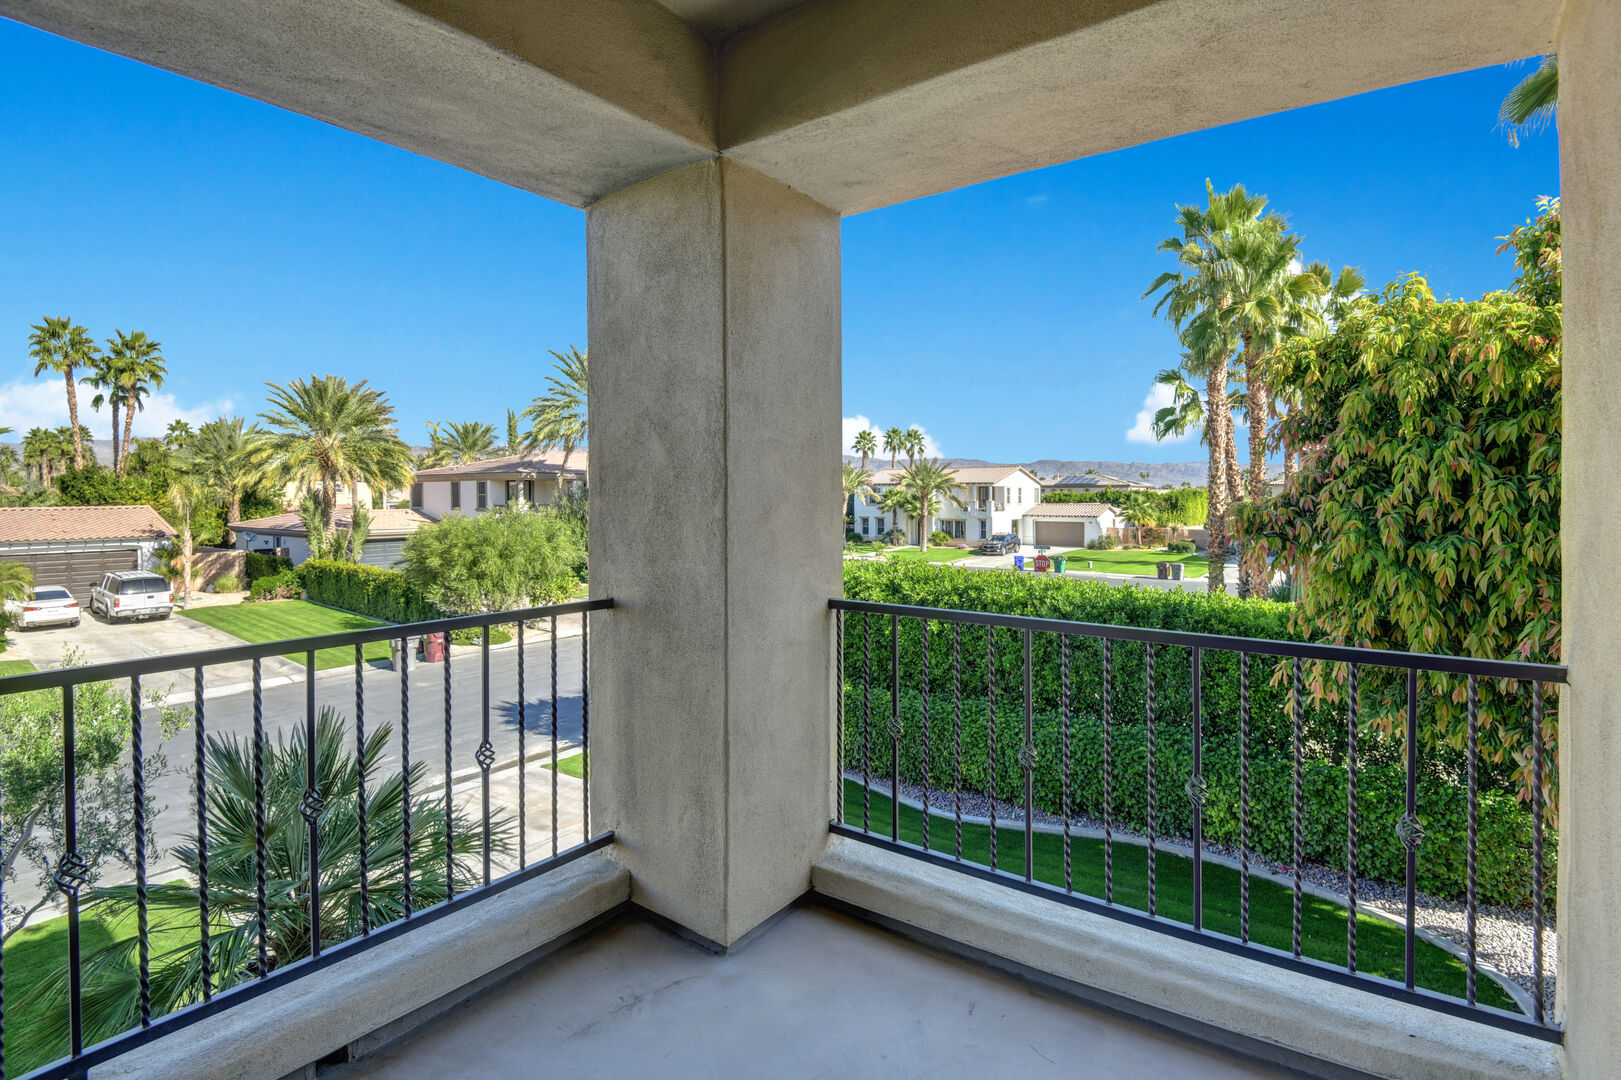 Step out onto the balcony of Master Suite 1 and soak in the stunning views.